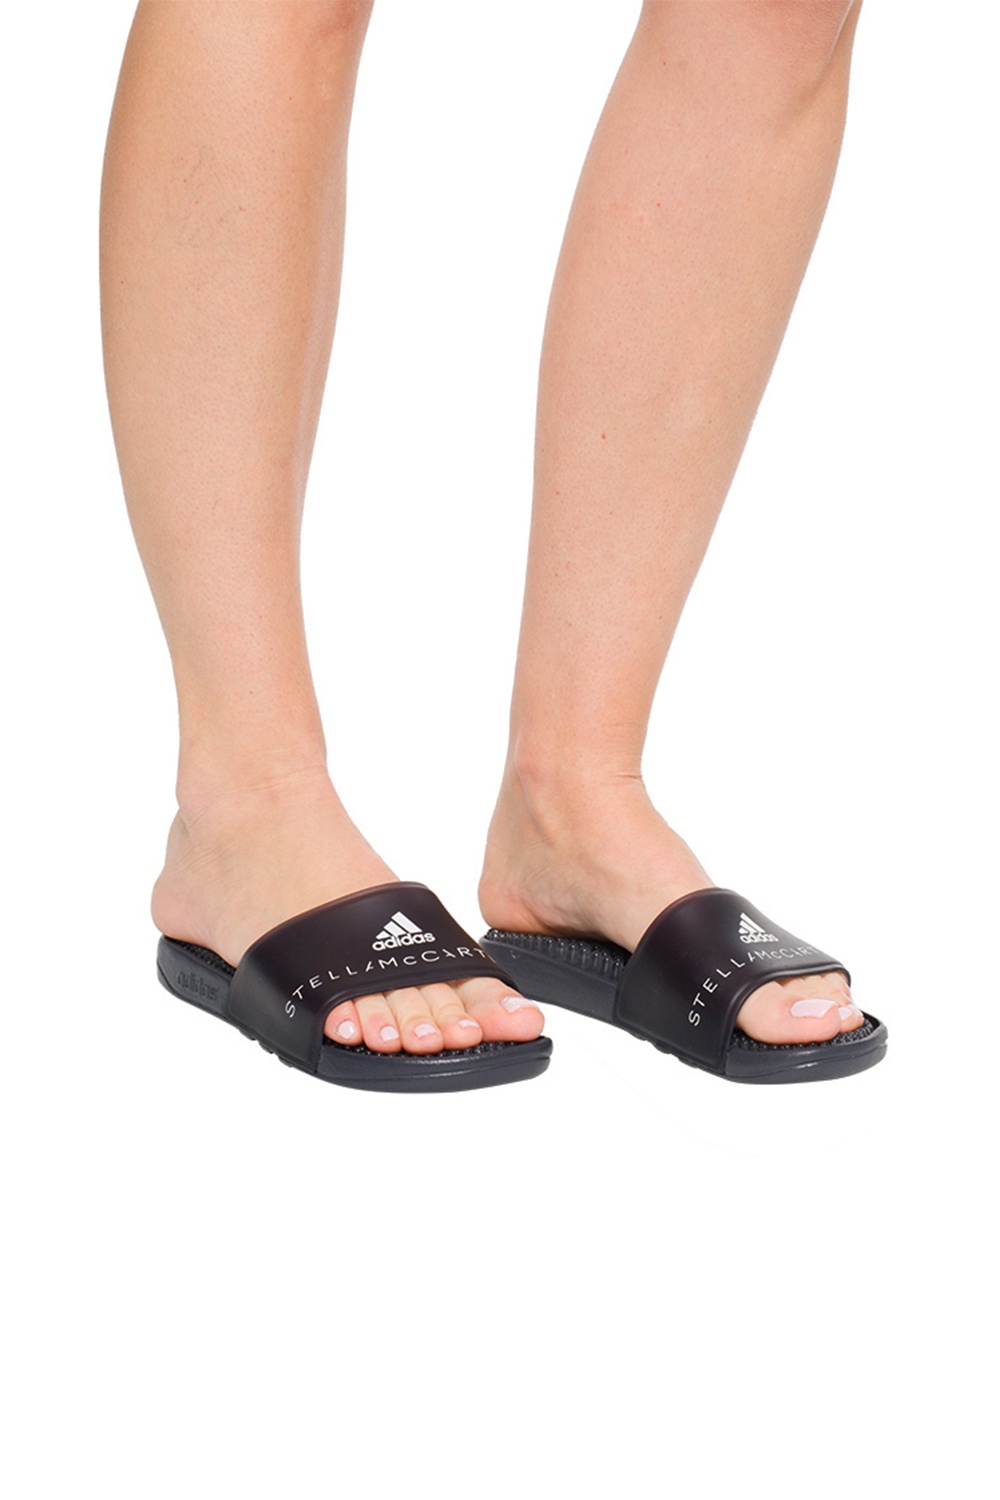 adidas sandals with nubs